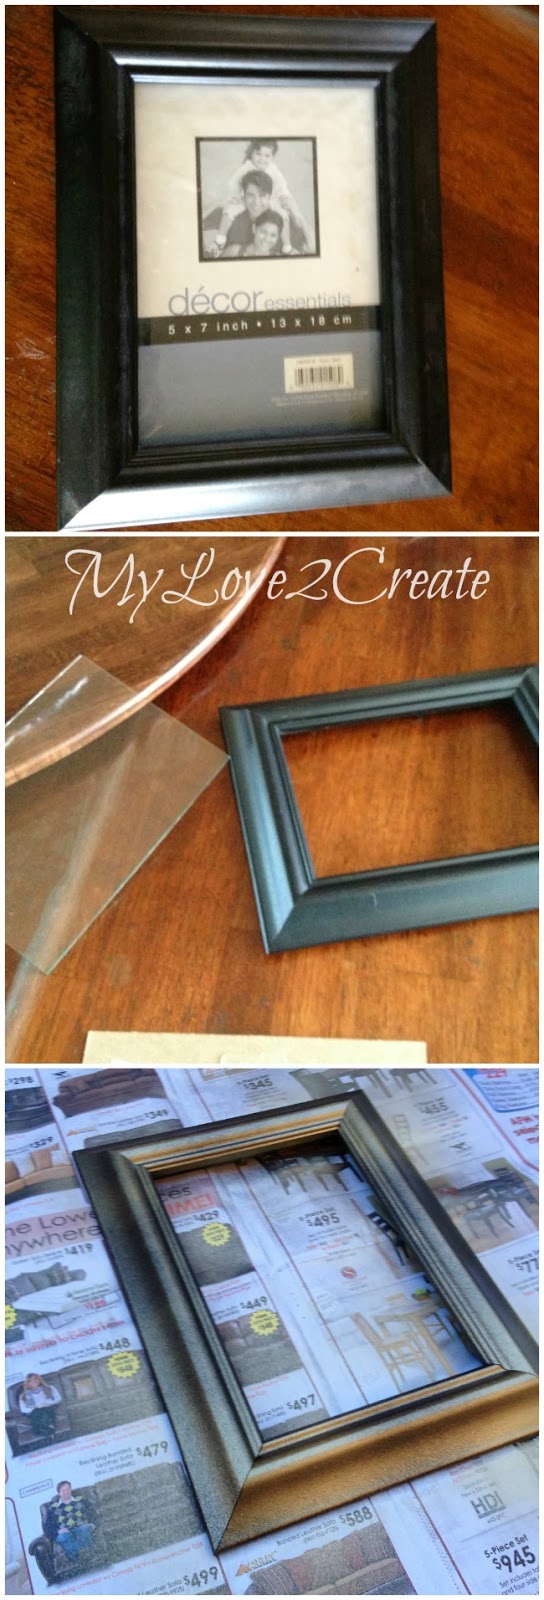 MyLove2Create, Gold spray-painted glass